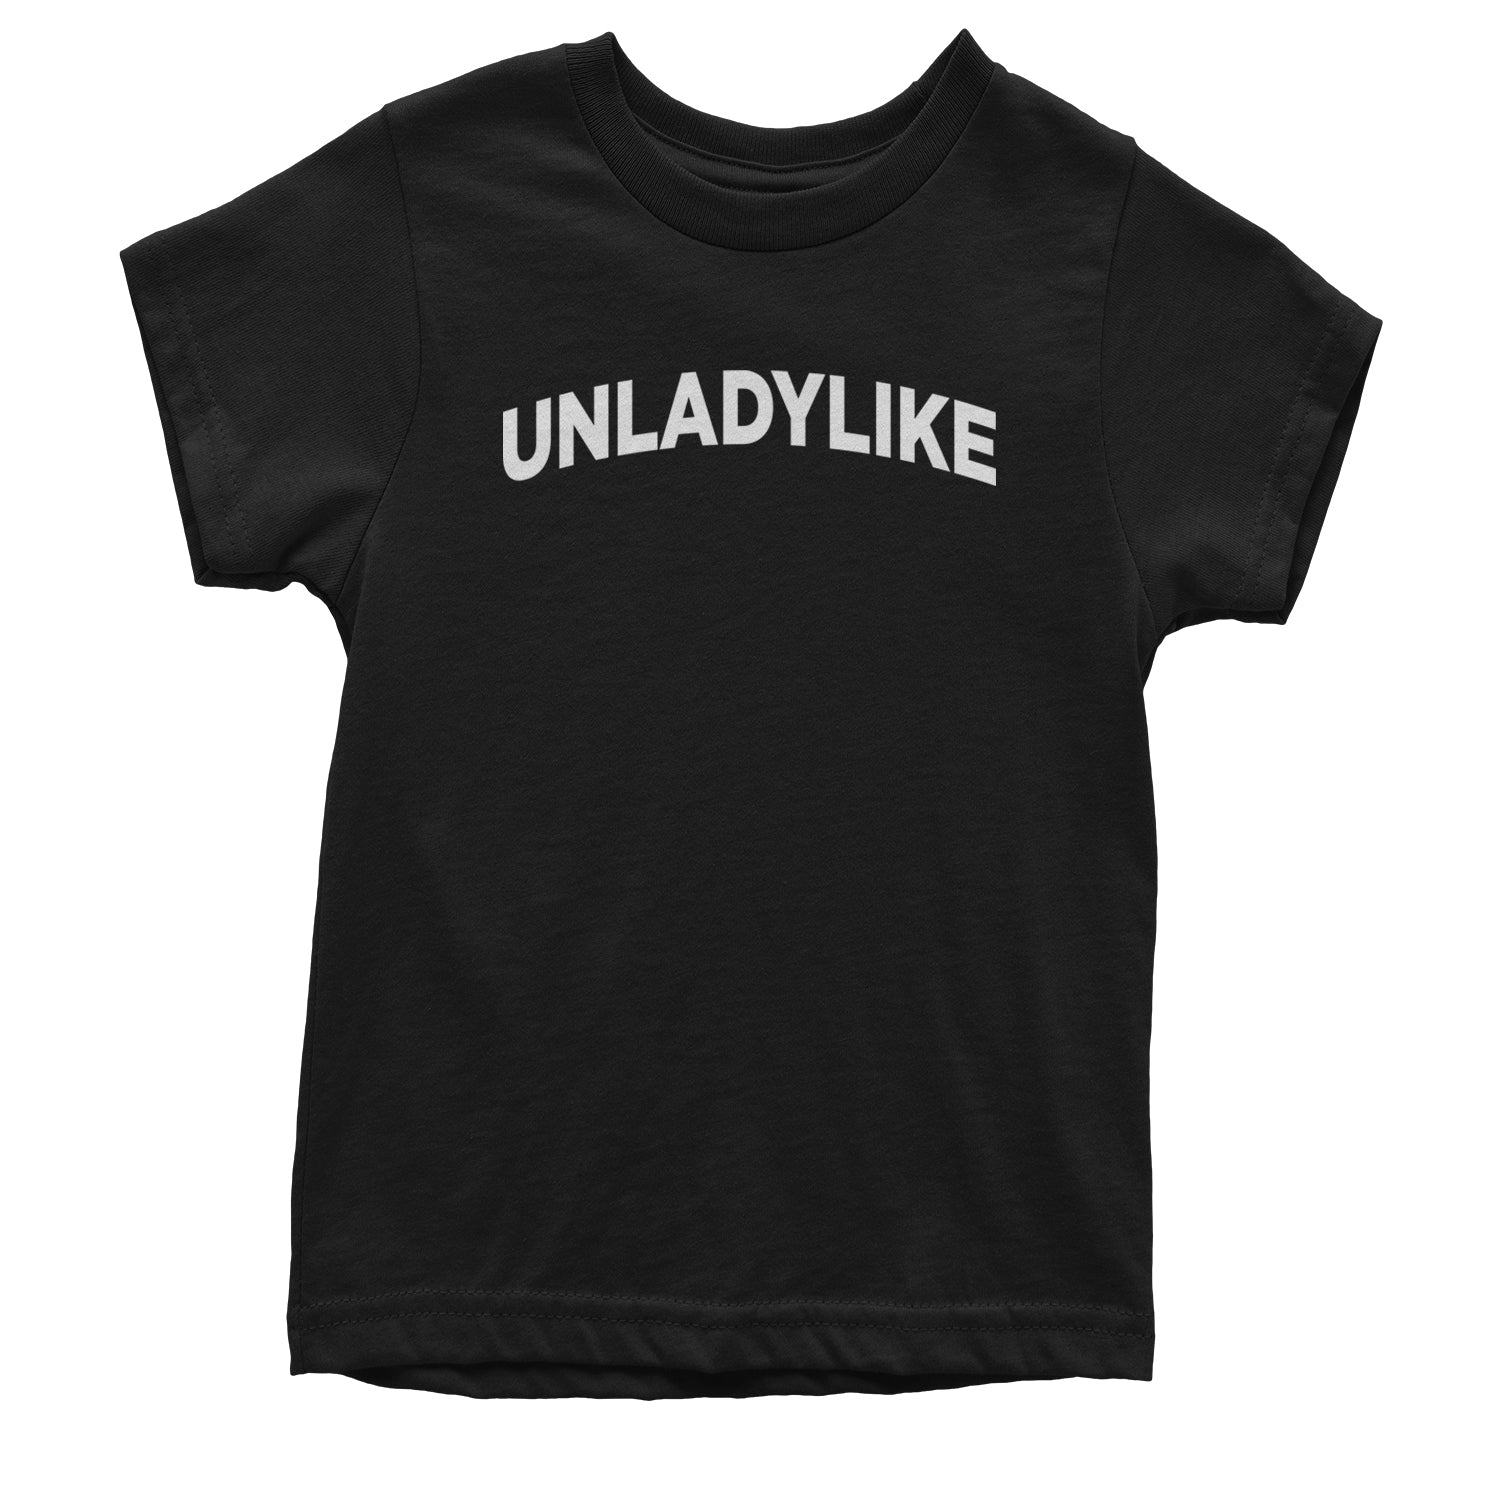 Unladylike Embrace Your Unique Strength Youth T-shirt